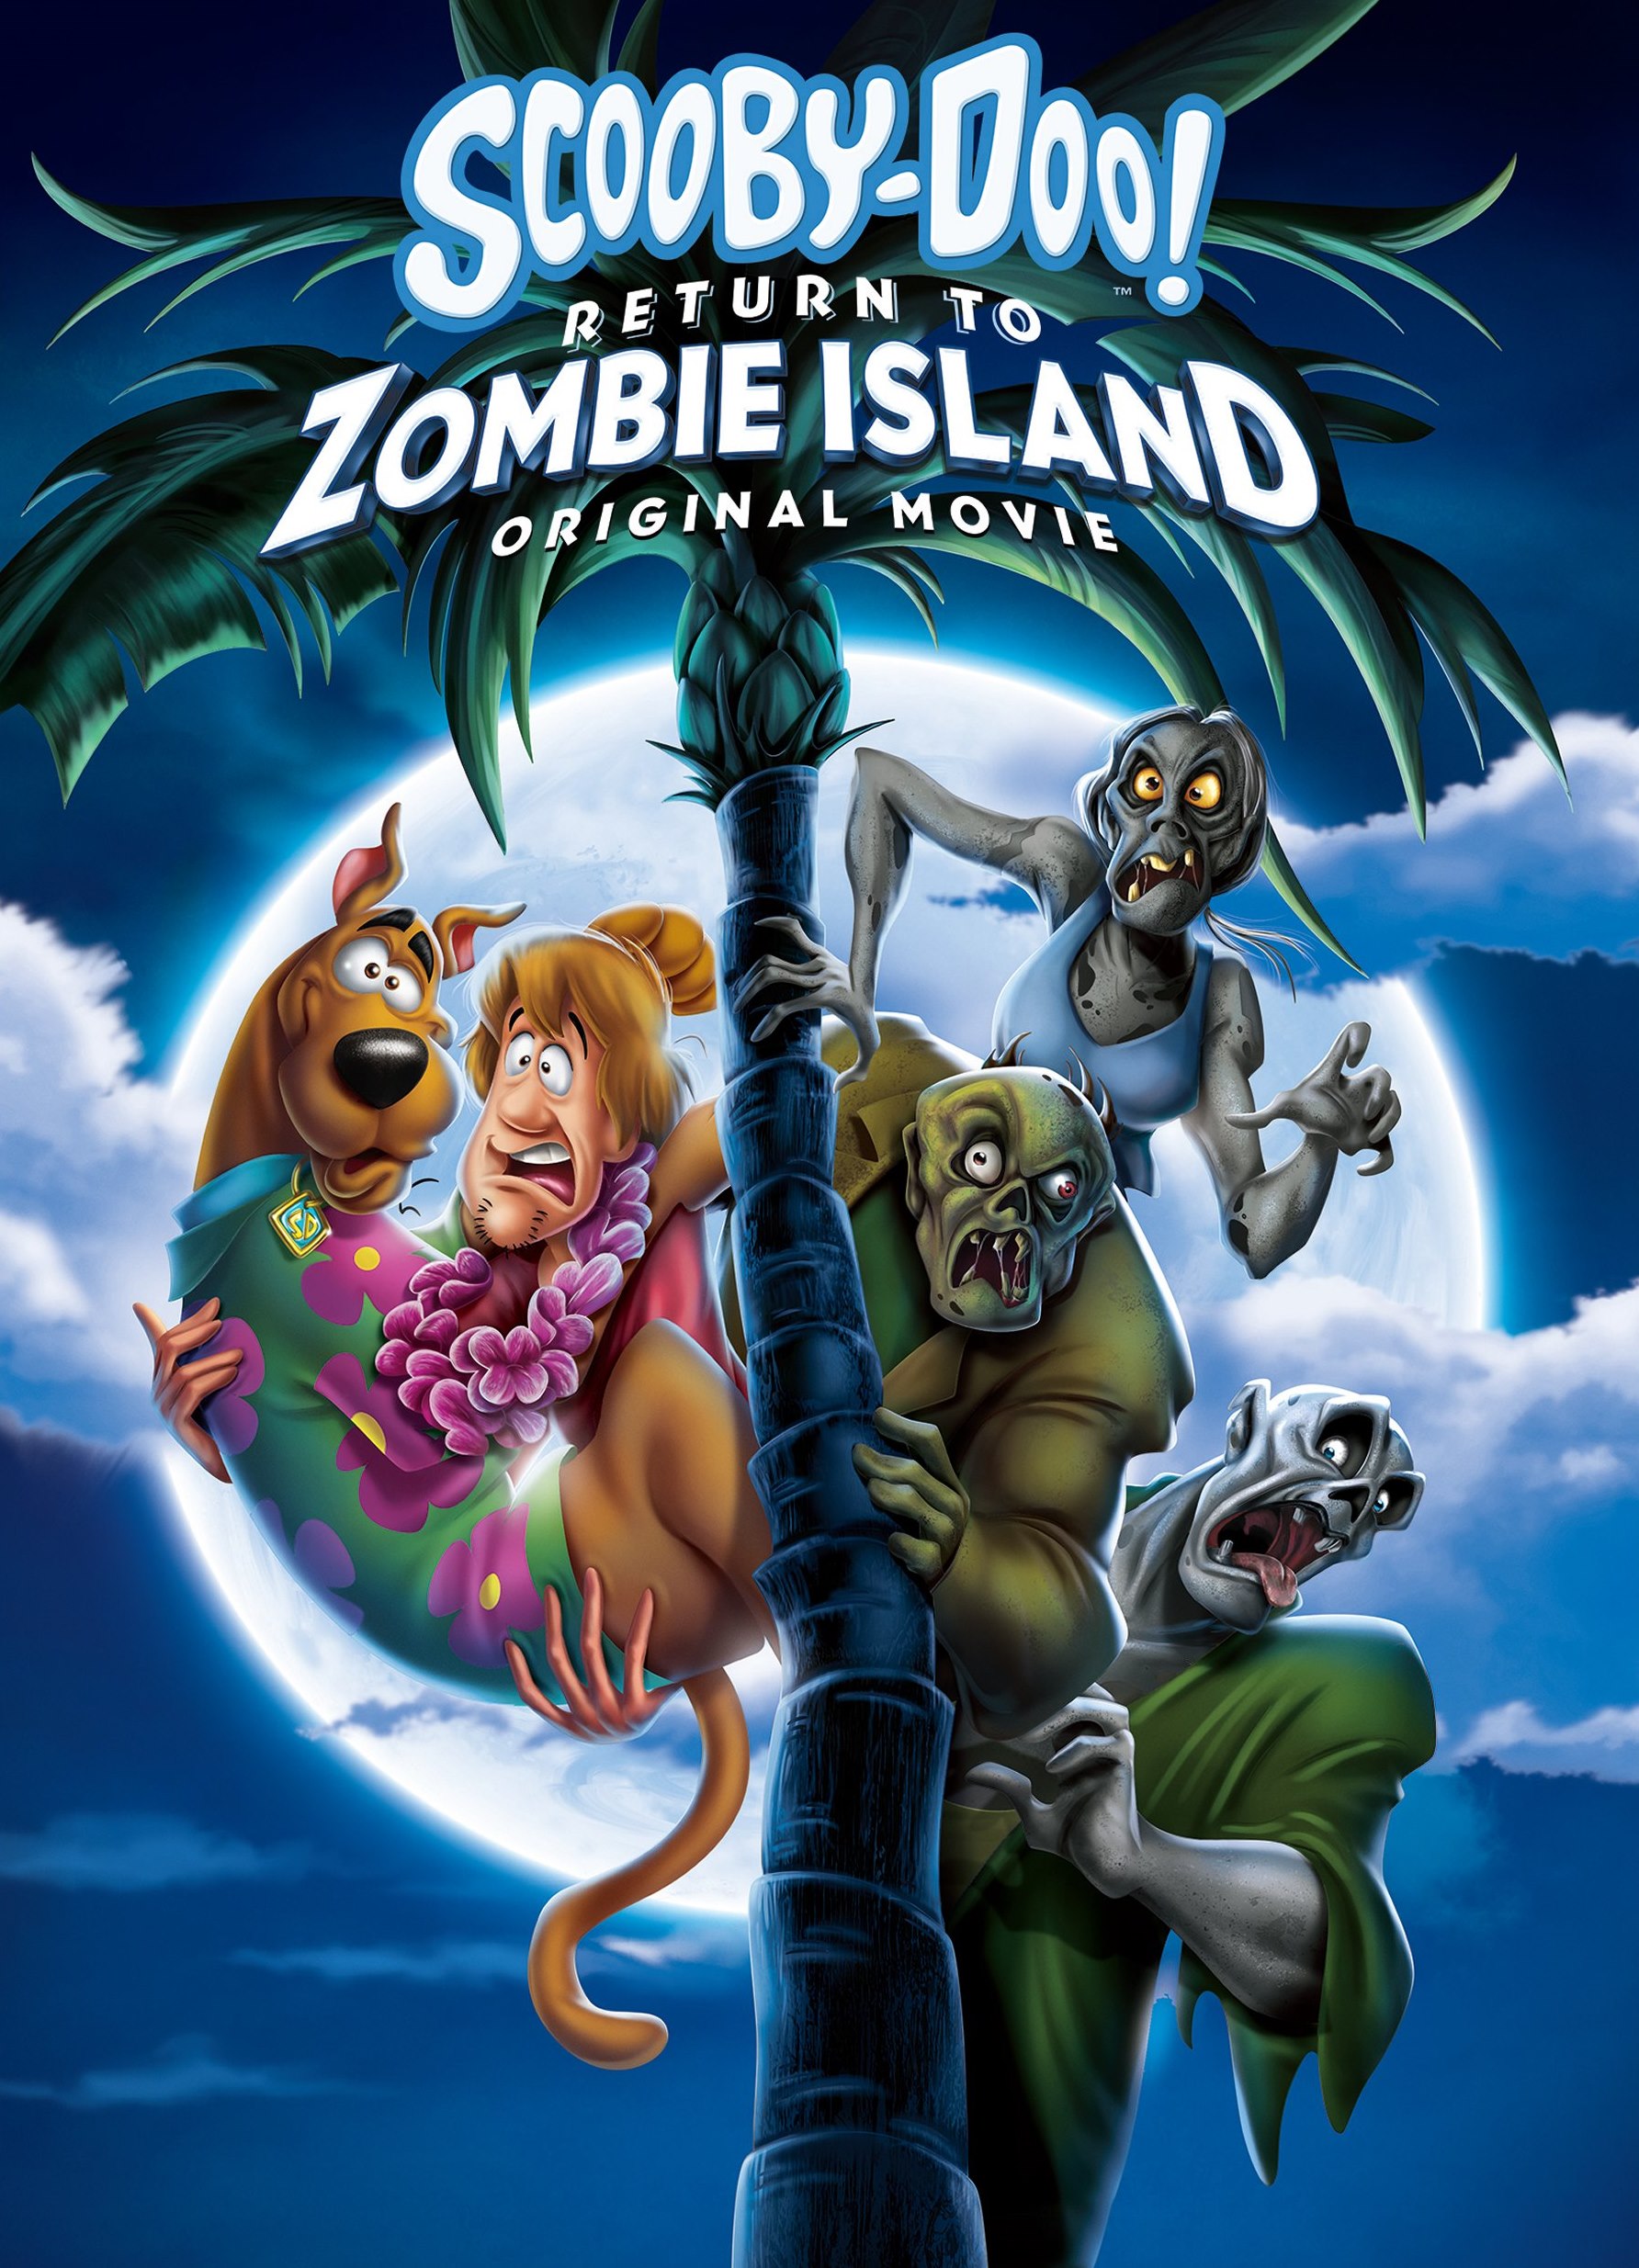 Scooby-Doo and the Rock 'n' Roll Zombie - Digital Downloads Collaboration -  OverDrive